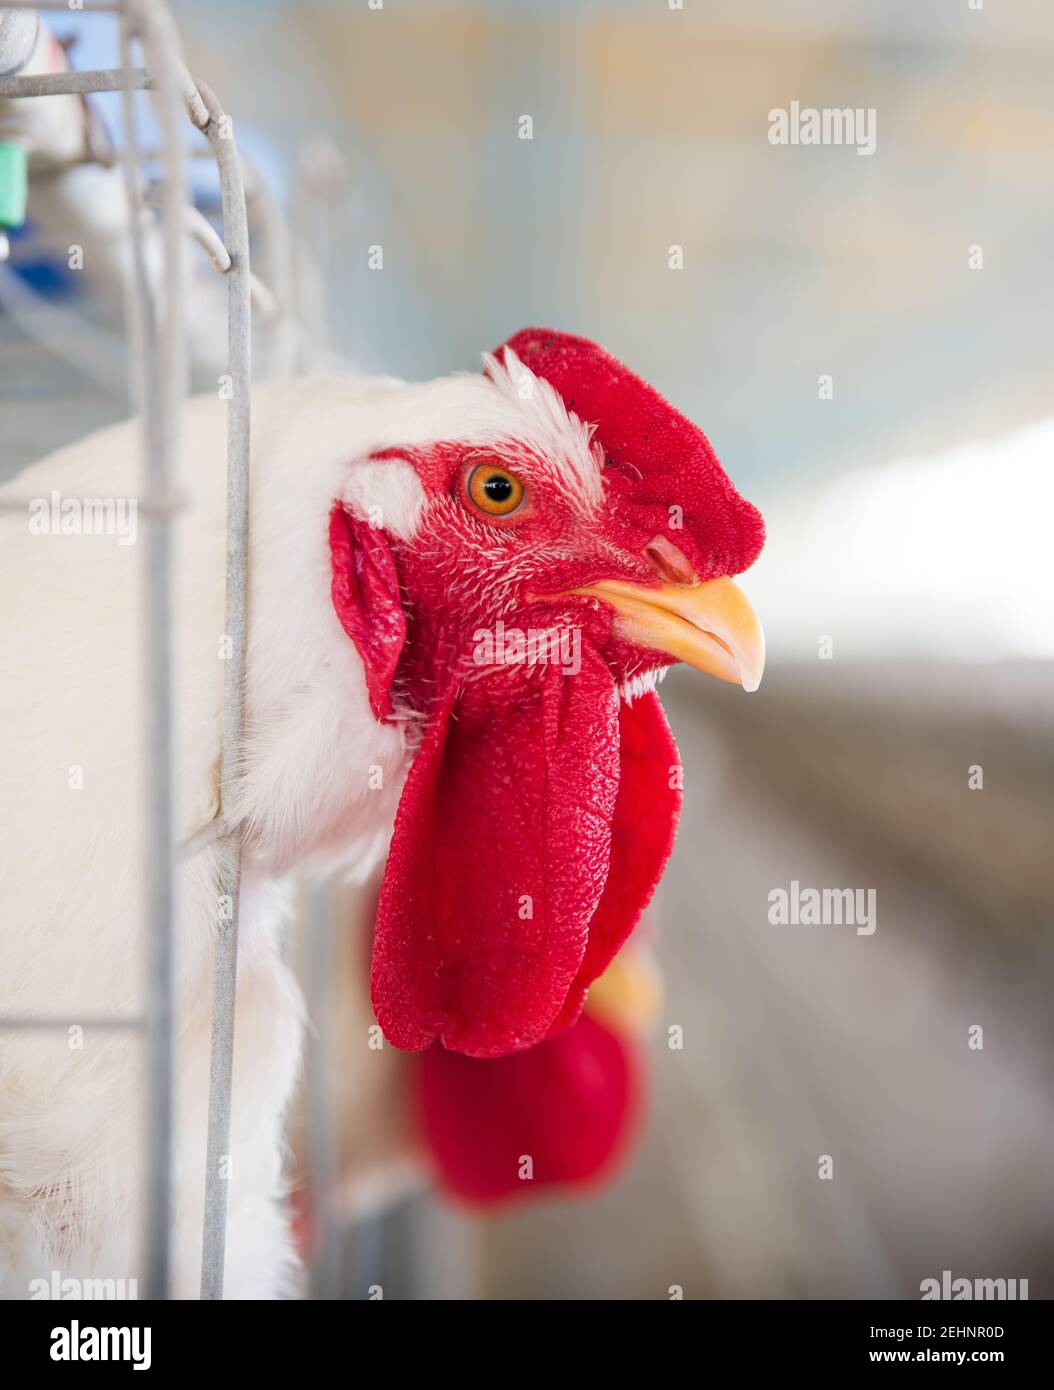 Chicken in a Cage at Poultry Farm Stock Photo